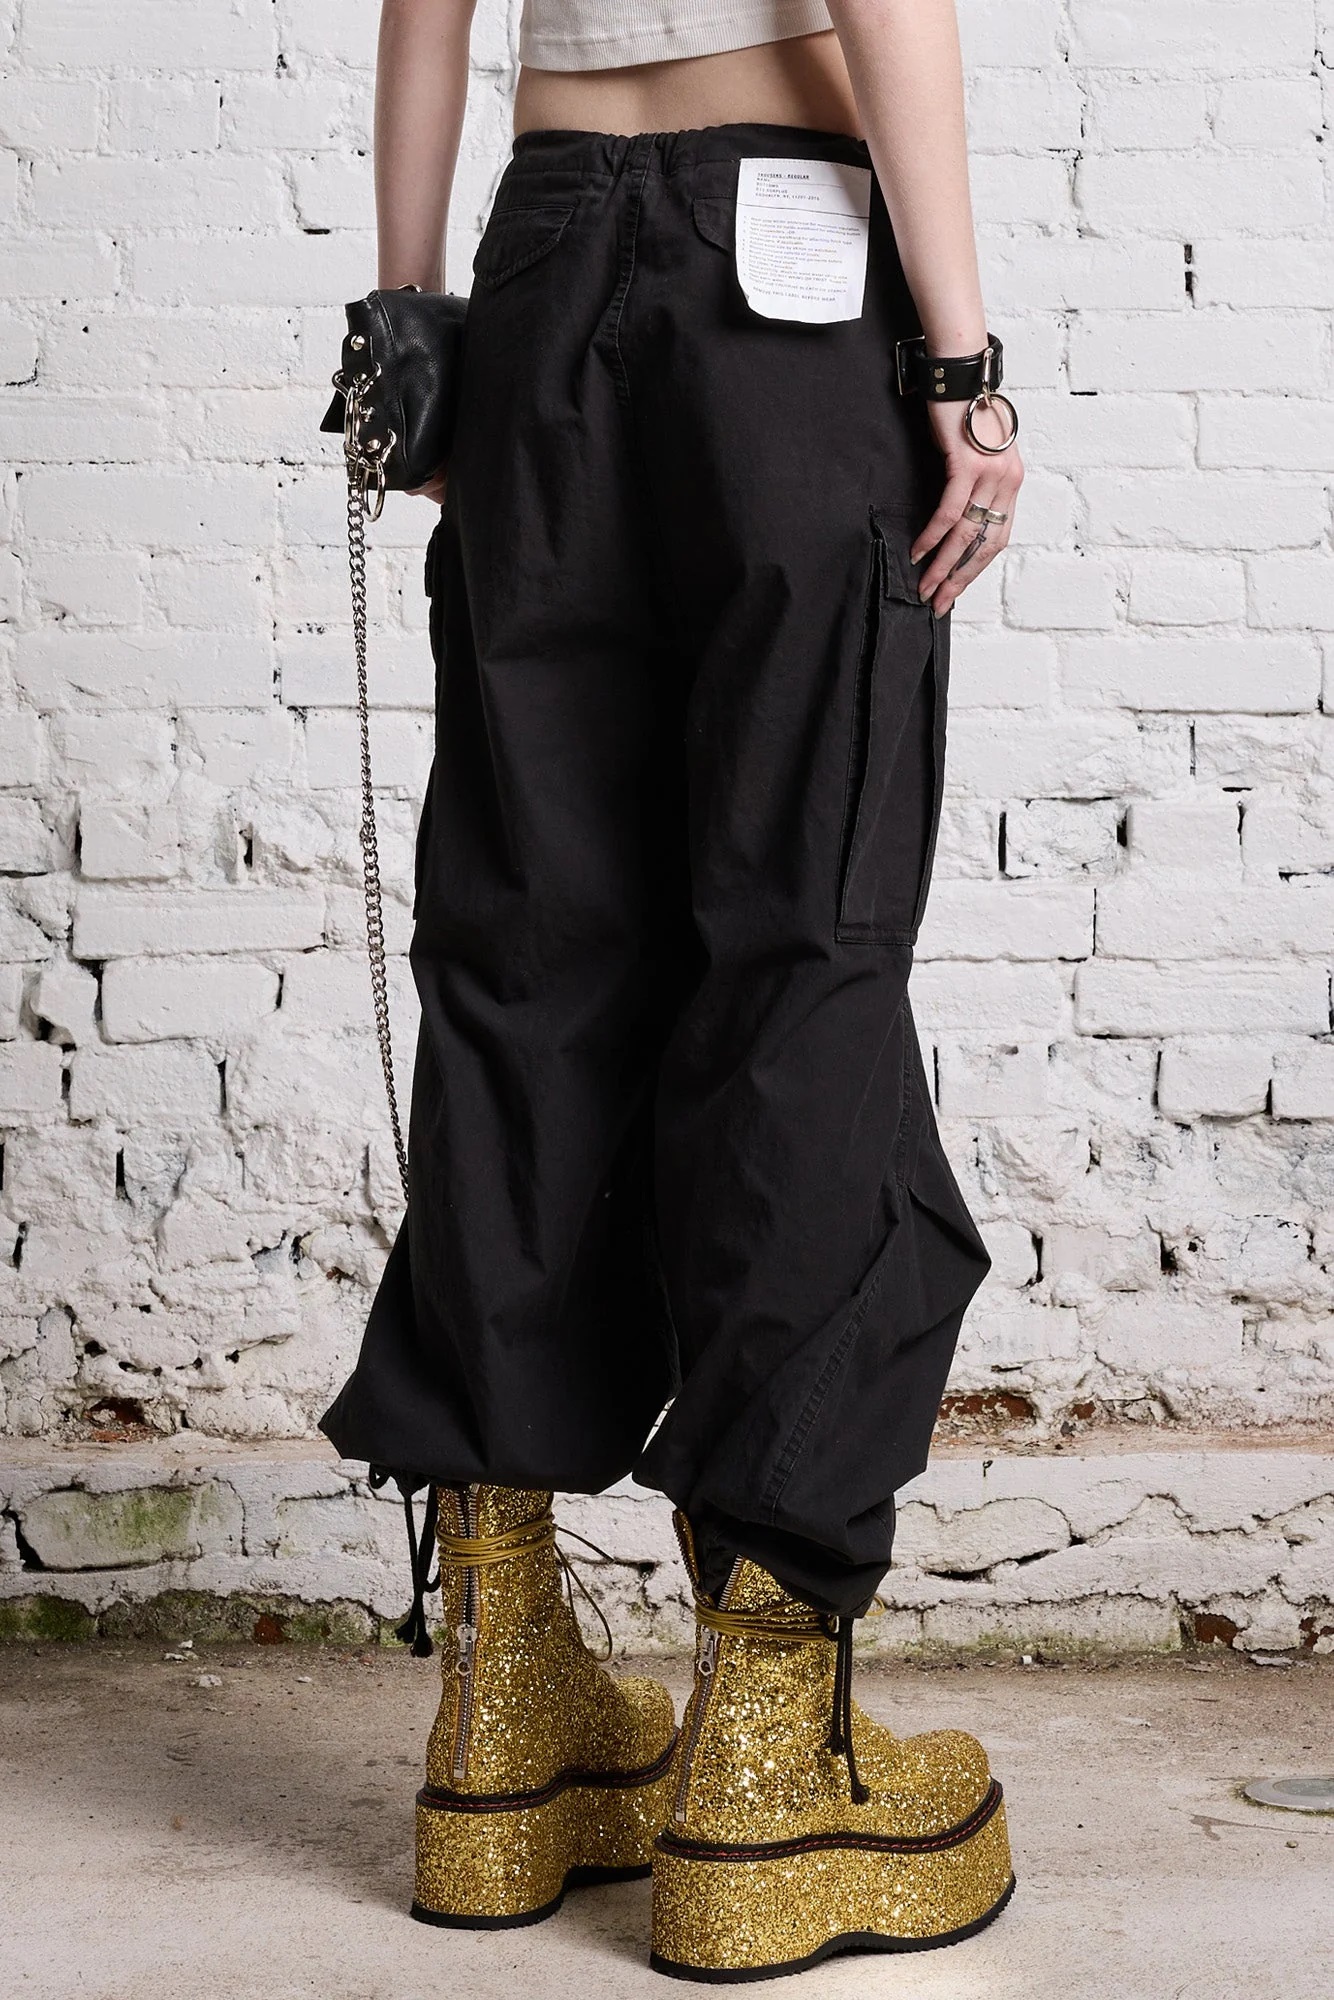 R13 Balloon Army Pants in Washed Black XS